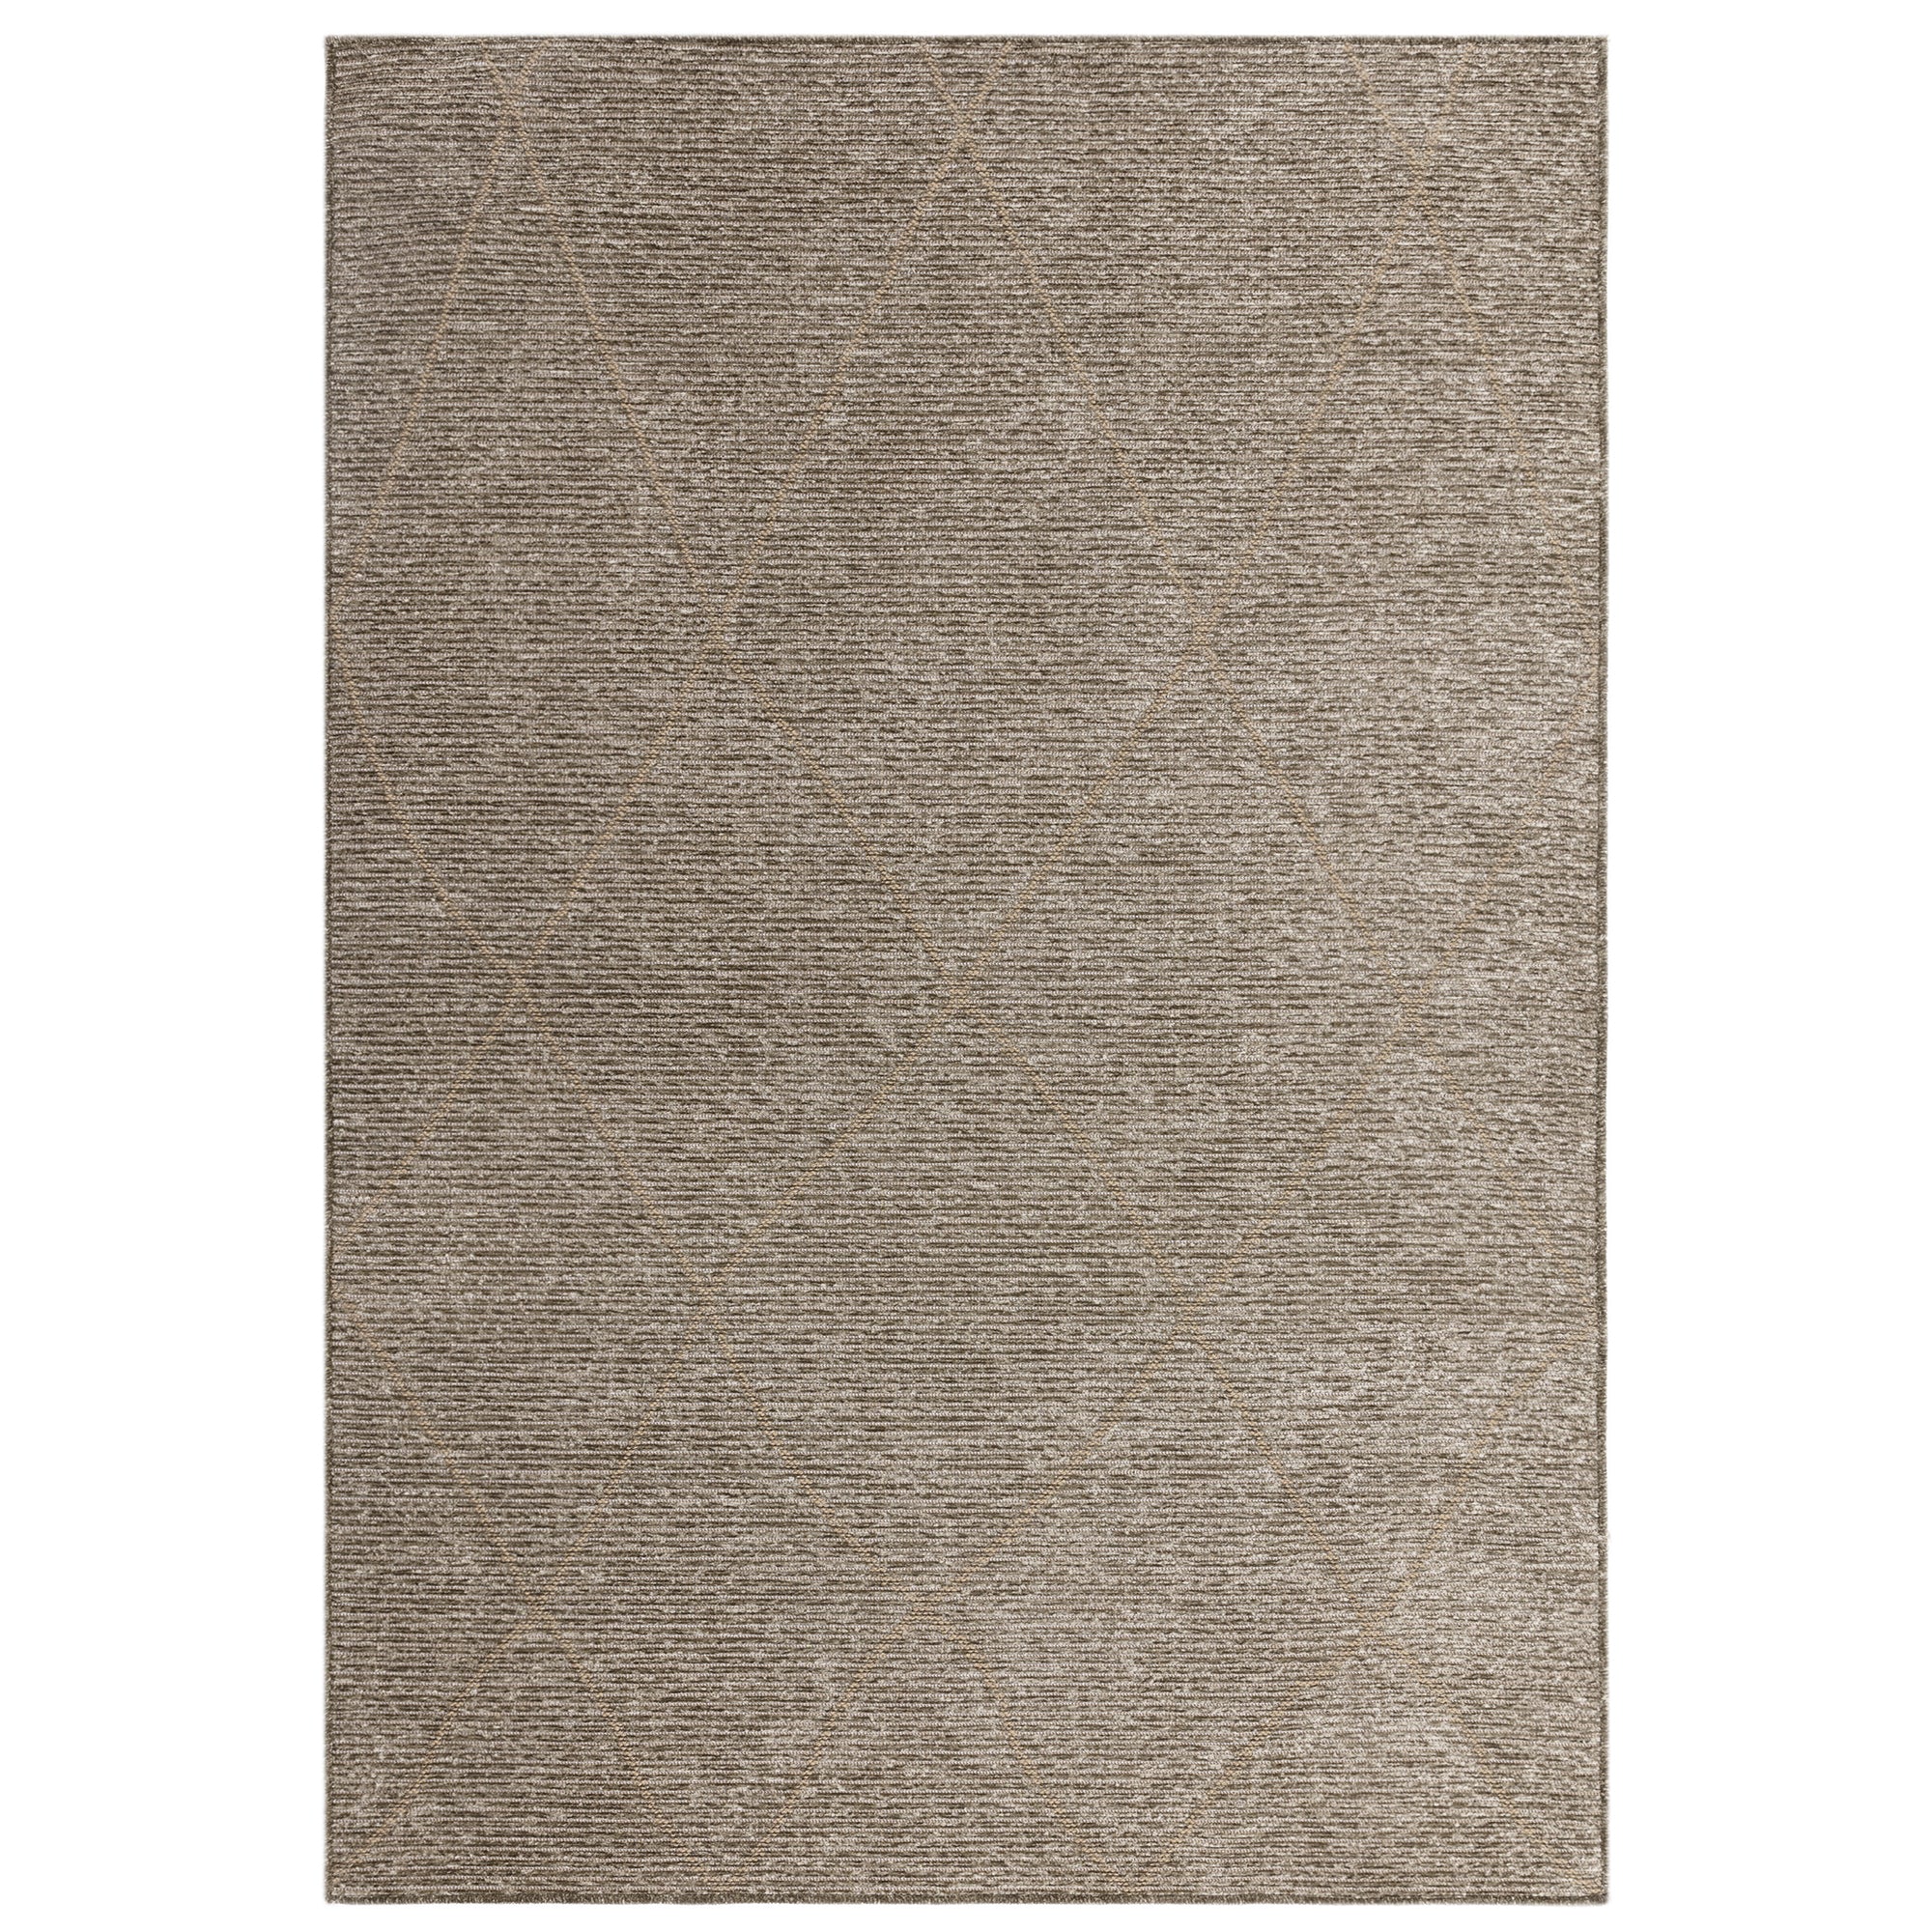 Mulberry Taupe Rug